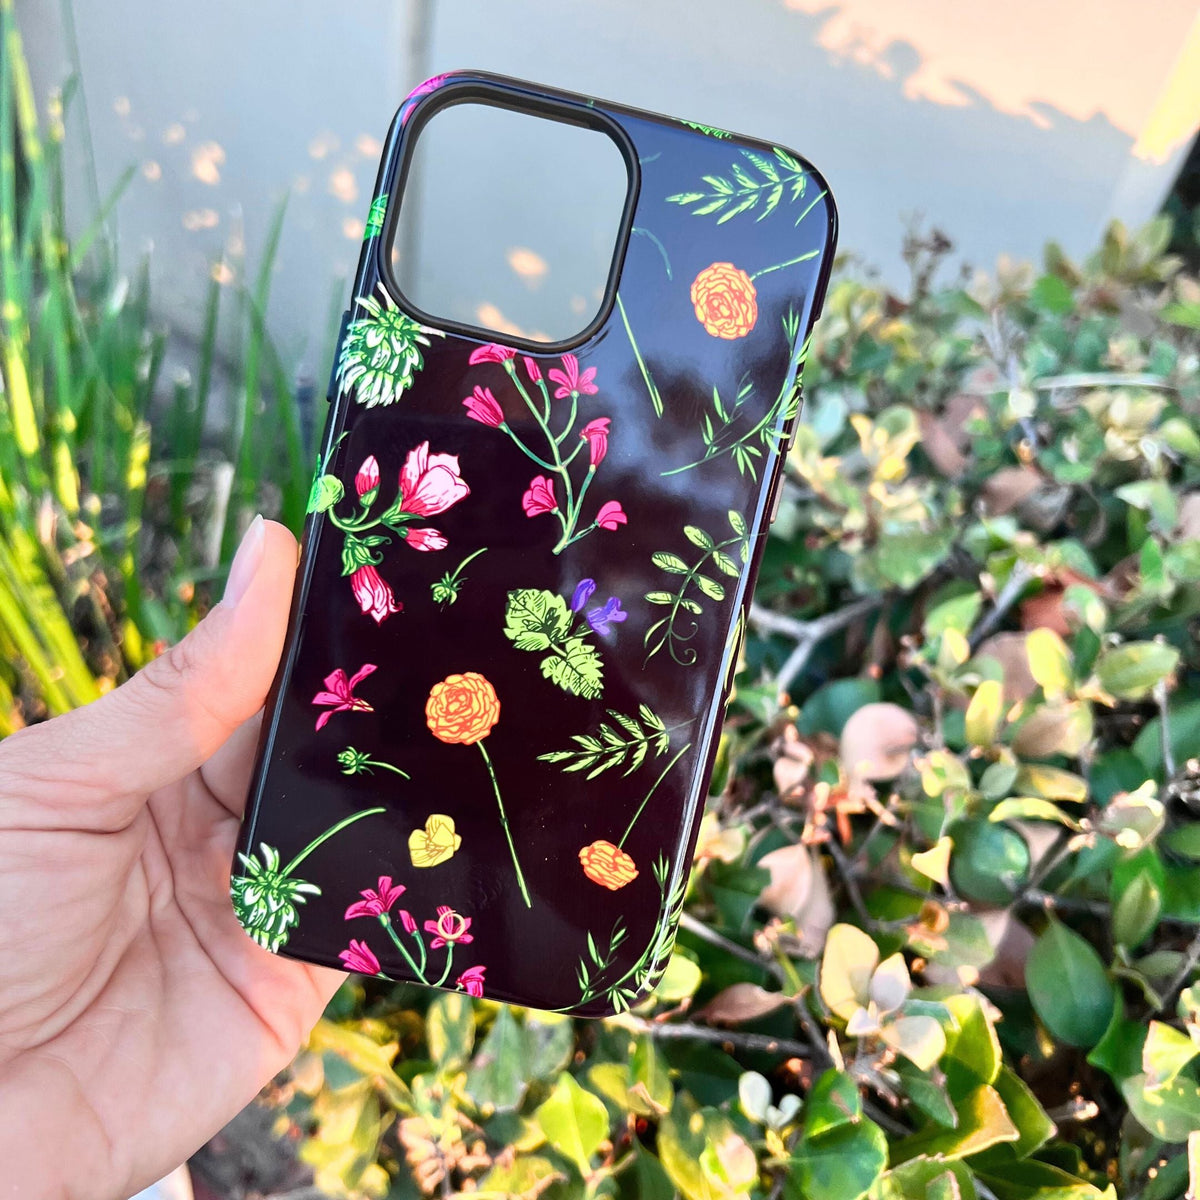 Blossom Field Flowers iPhone Case - iPhone 11 Pro